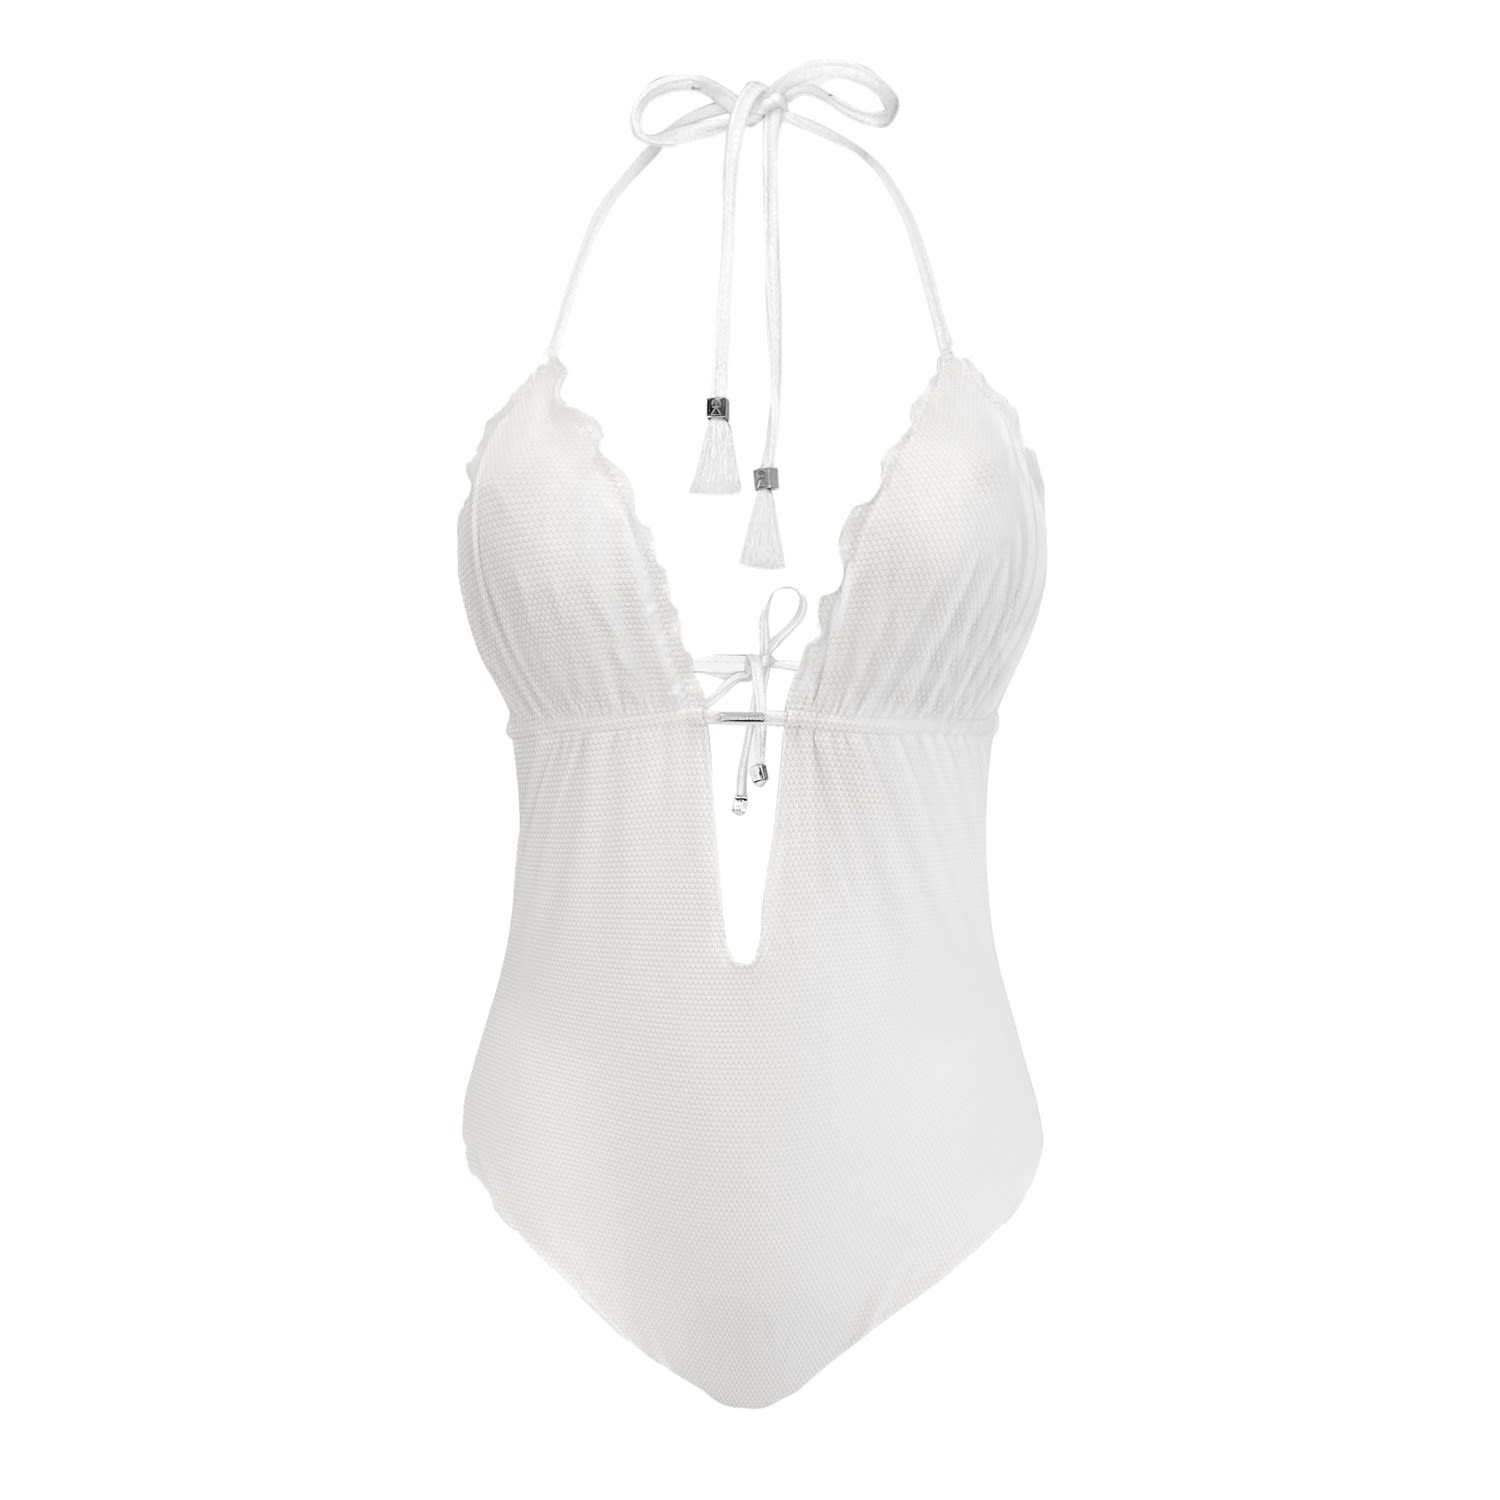 Women’s White Plunge Triangle One Piece Maillot Swimsuit Anita Large Elin Ritter Ibiza